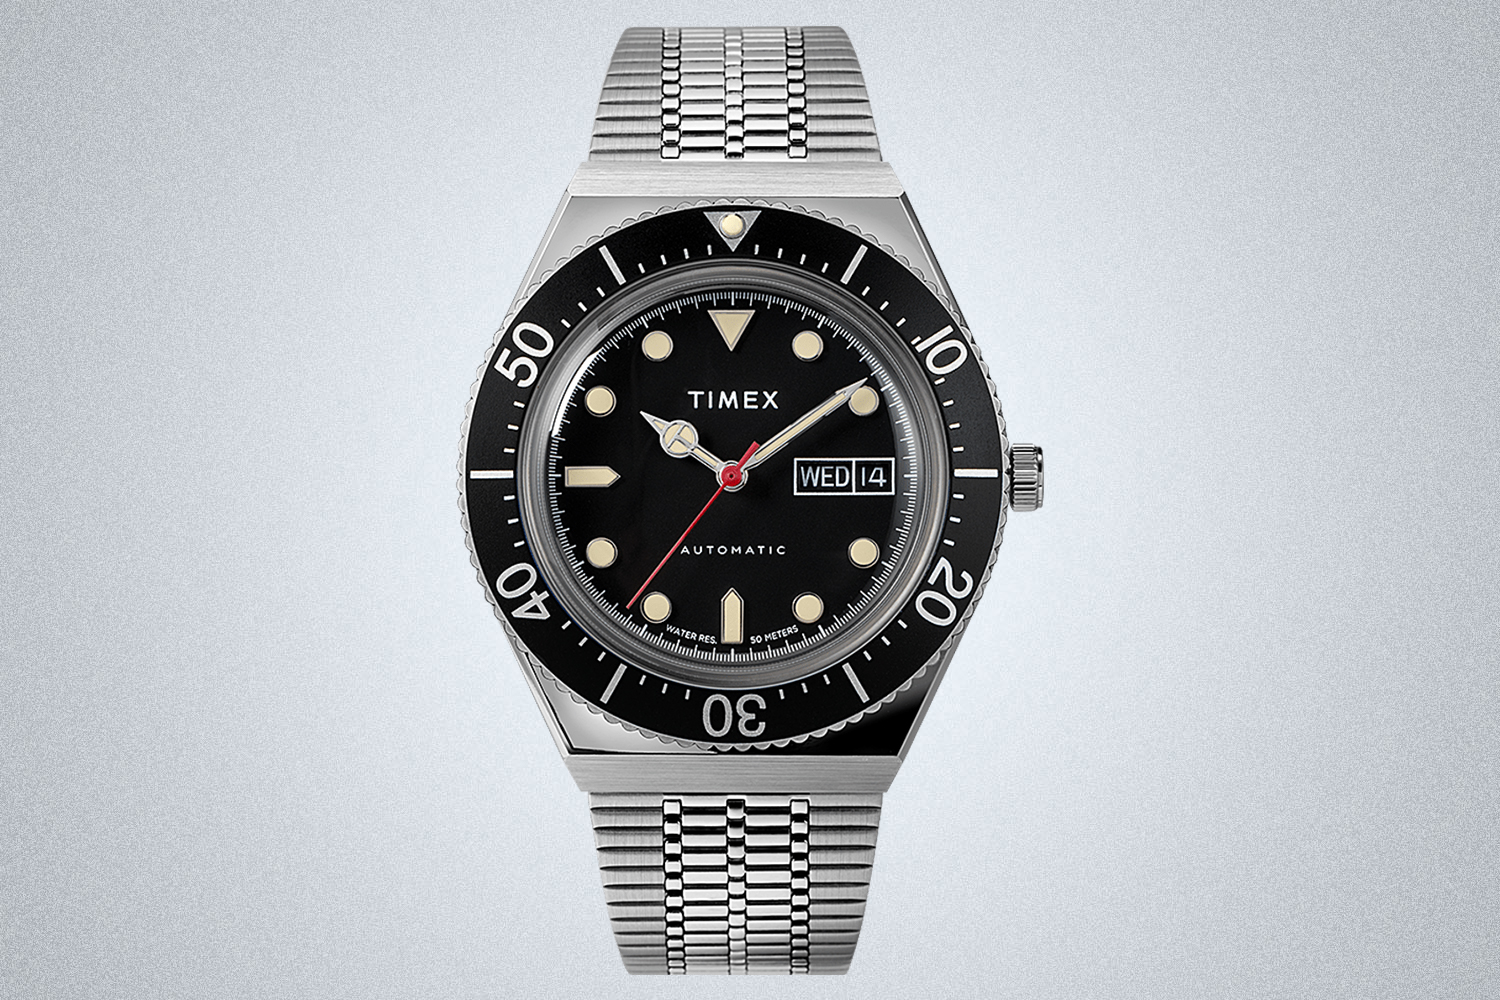 The Timex M79 Automatic men's watch with a black dial and bezel